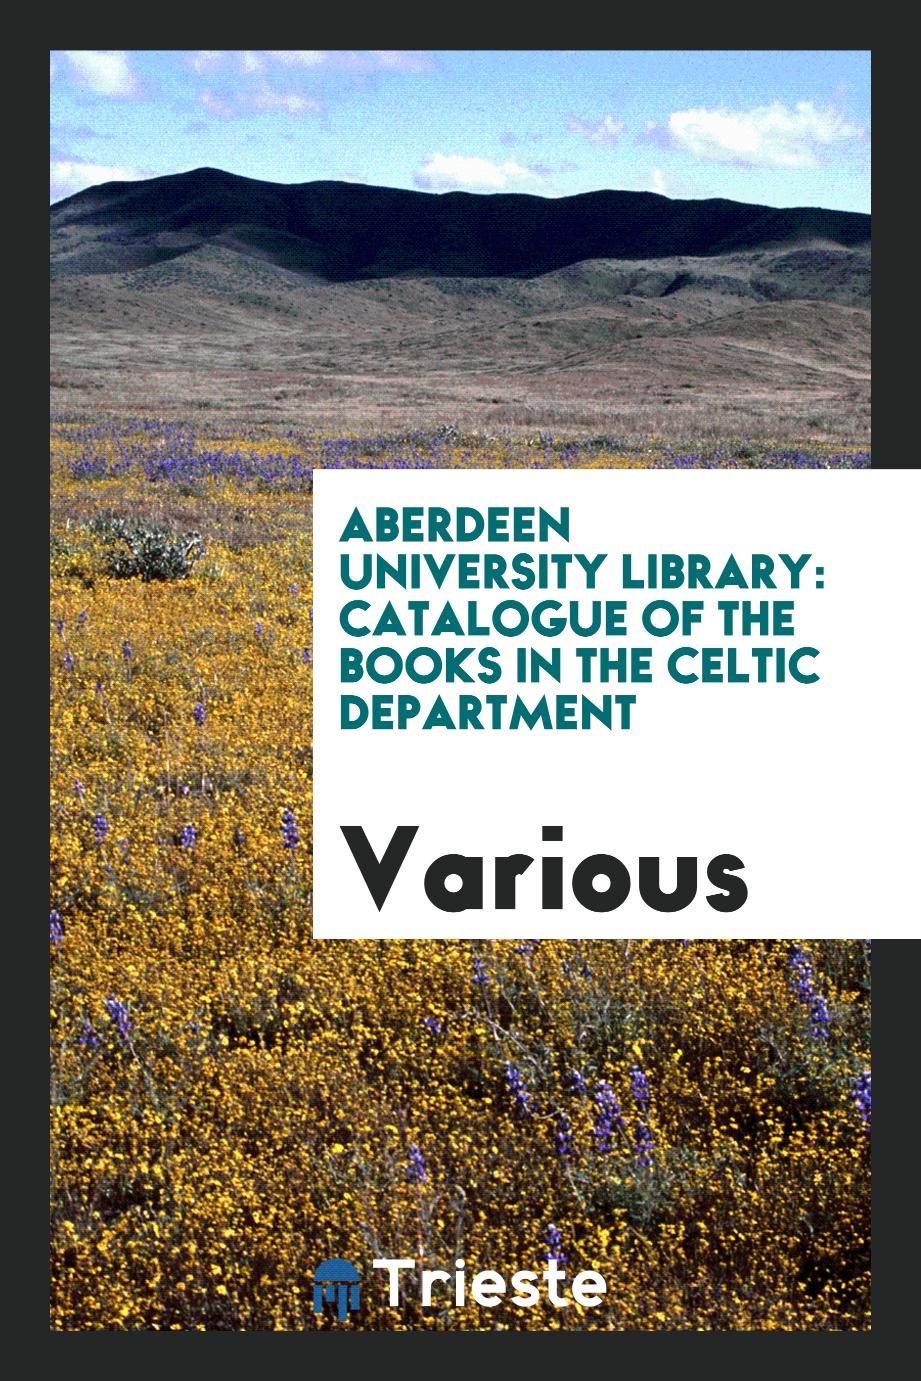 Aberdeen University Library: Catalogue of the Books in the Celtic Department